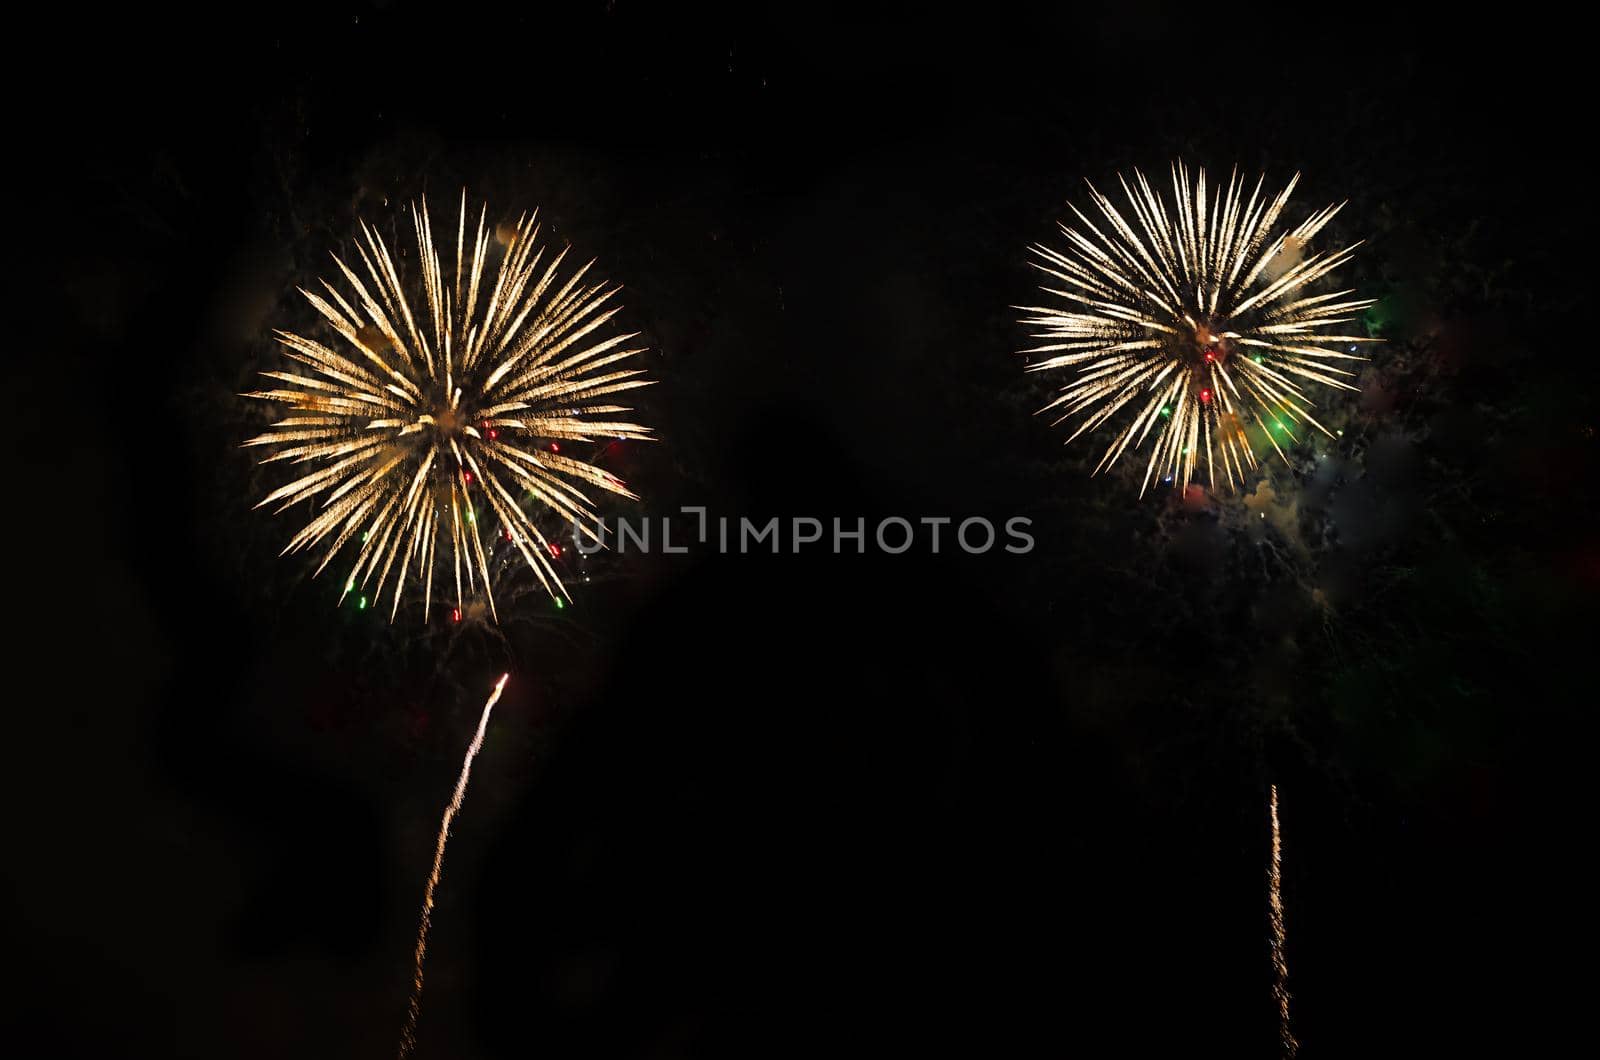 Two fireworks on night sky by andre_dechapelle